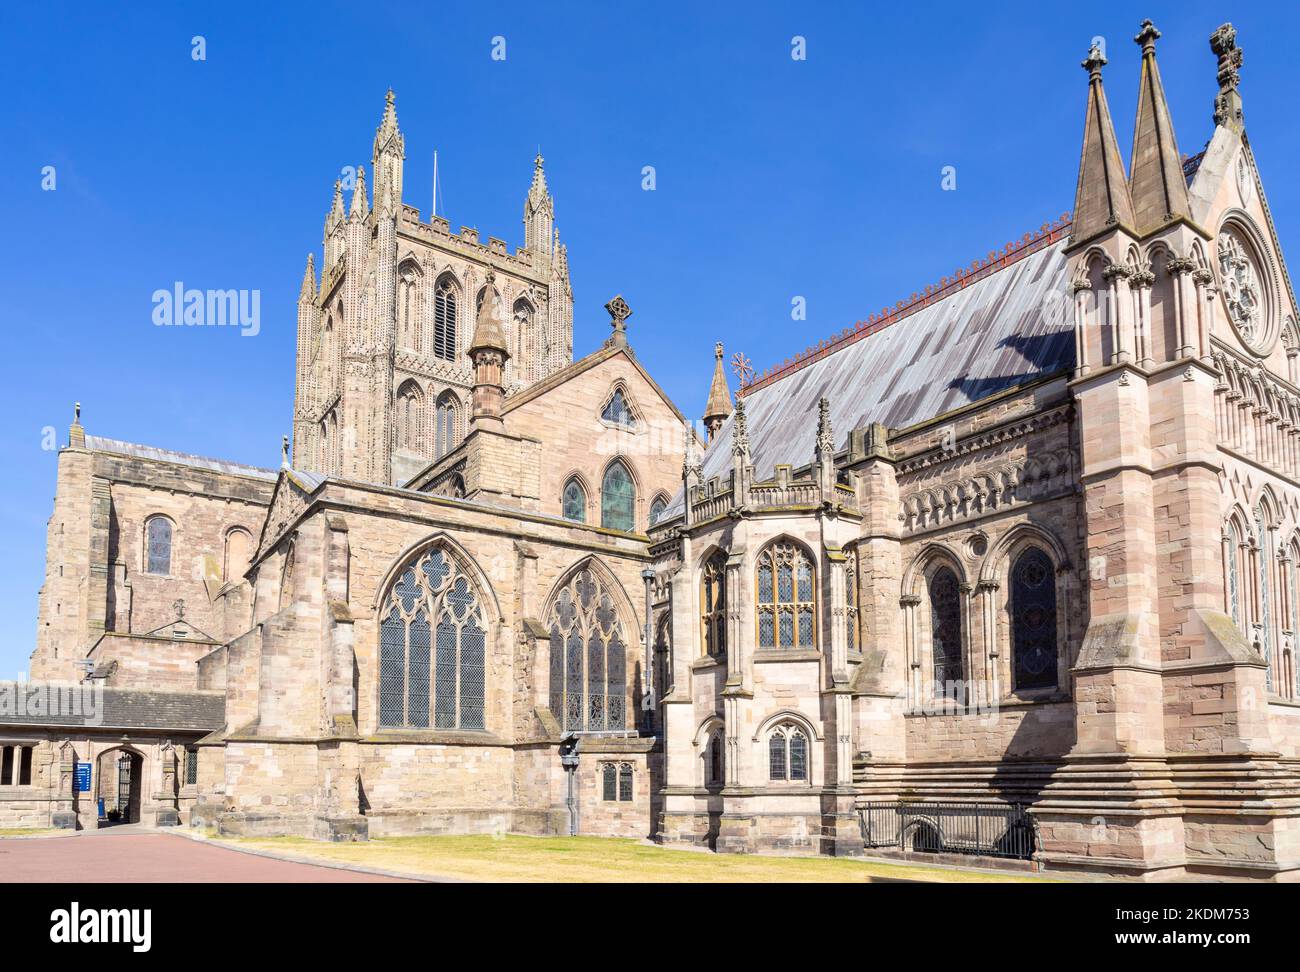 Cathédrale Hereford Hereford Herefordshire Angleterre GB Europe Banque D'Images